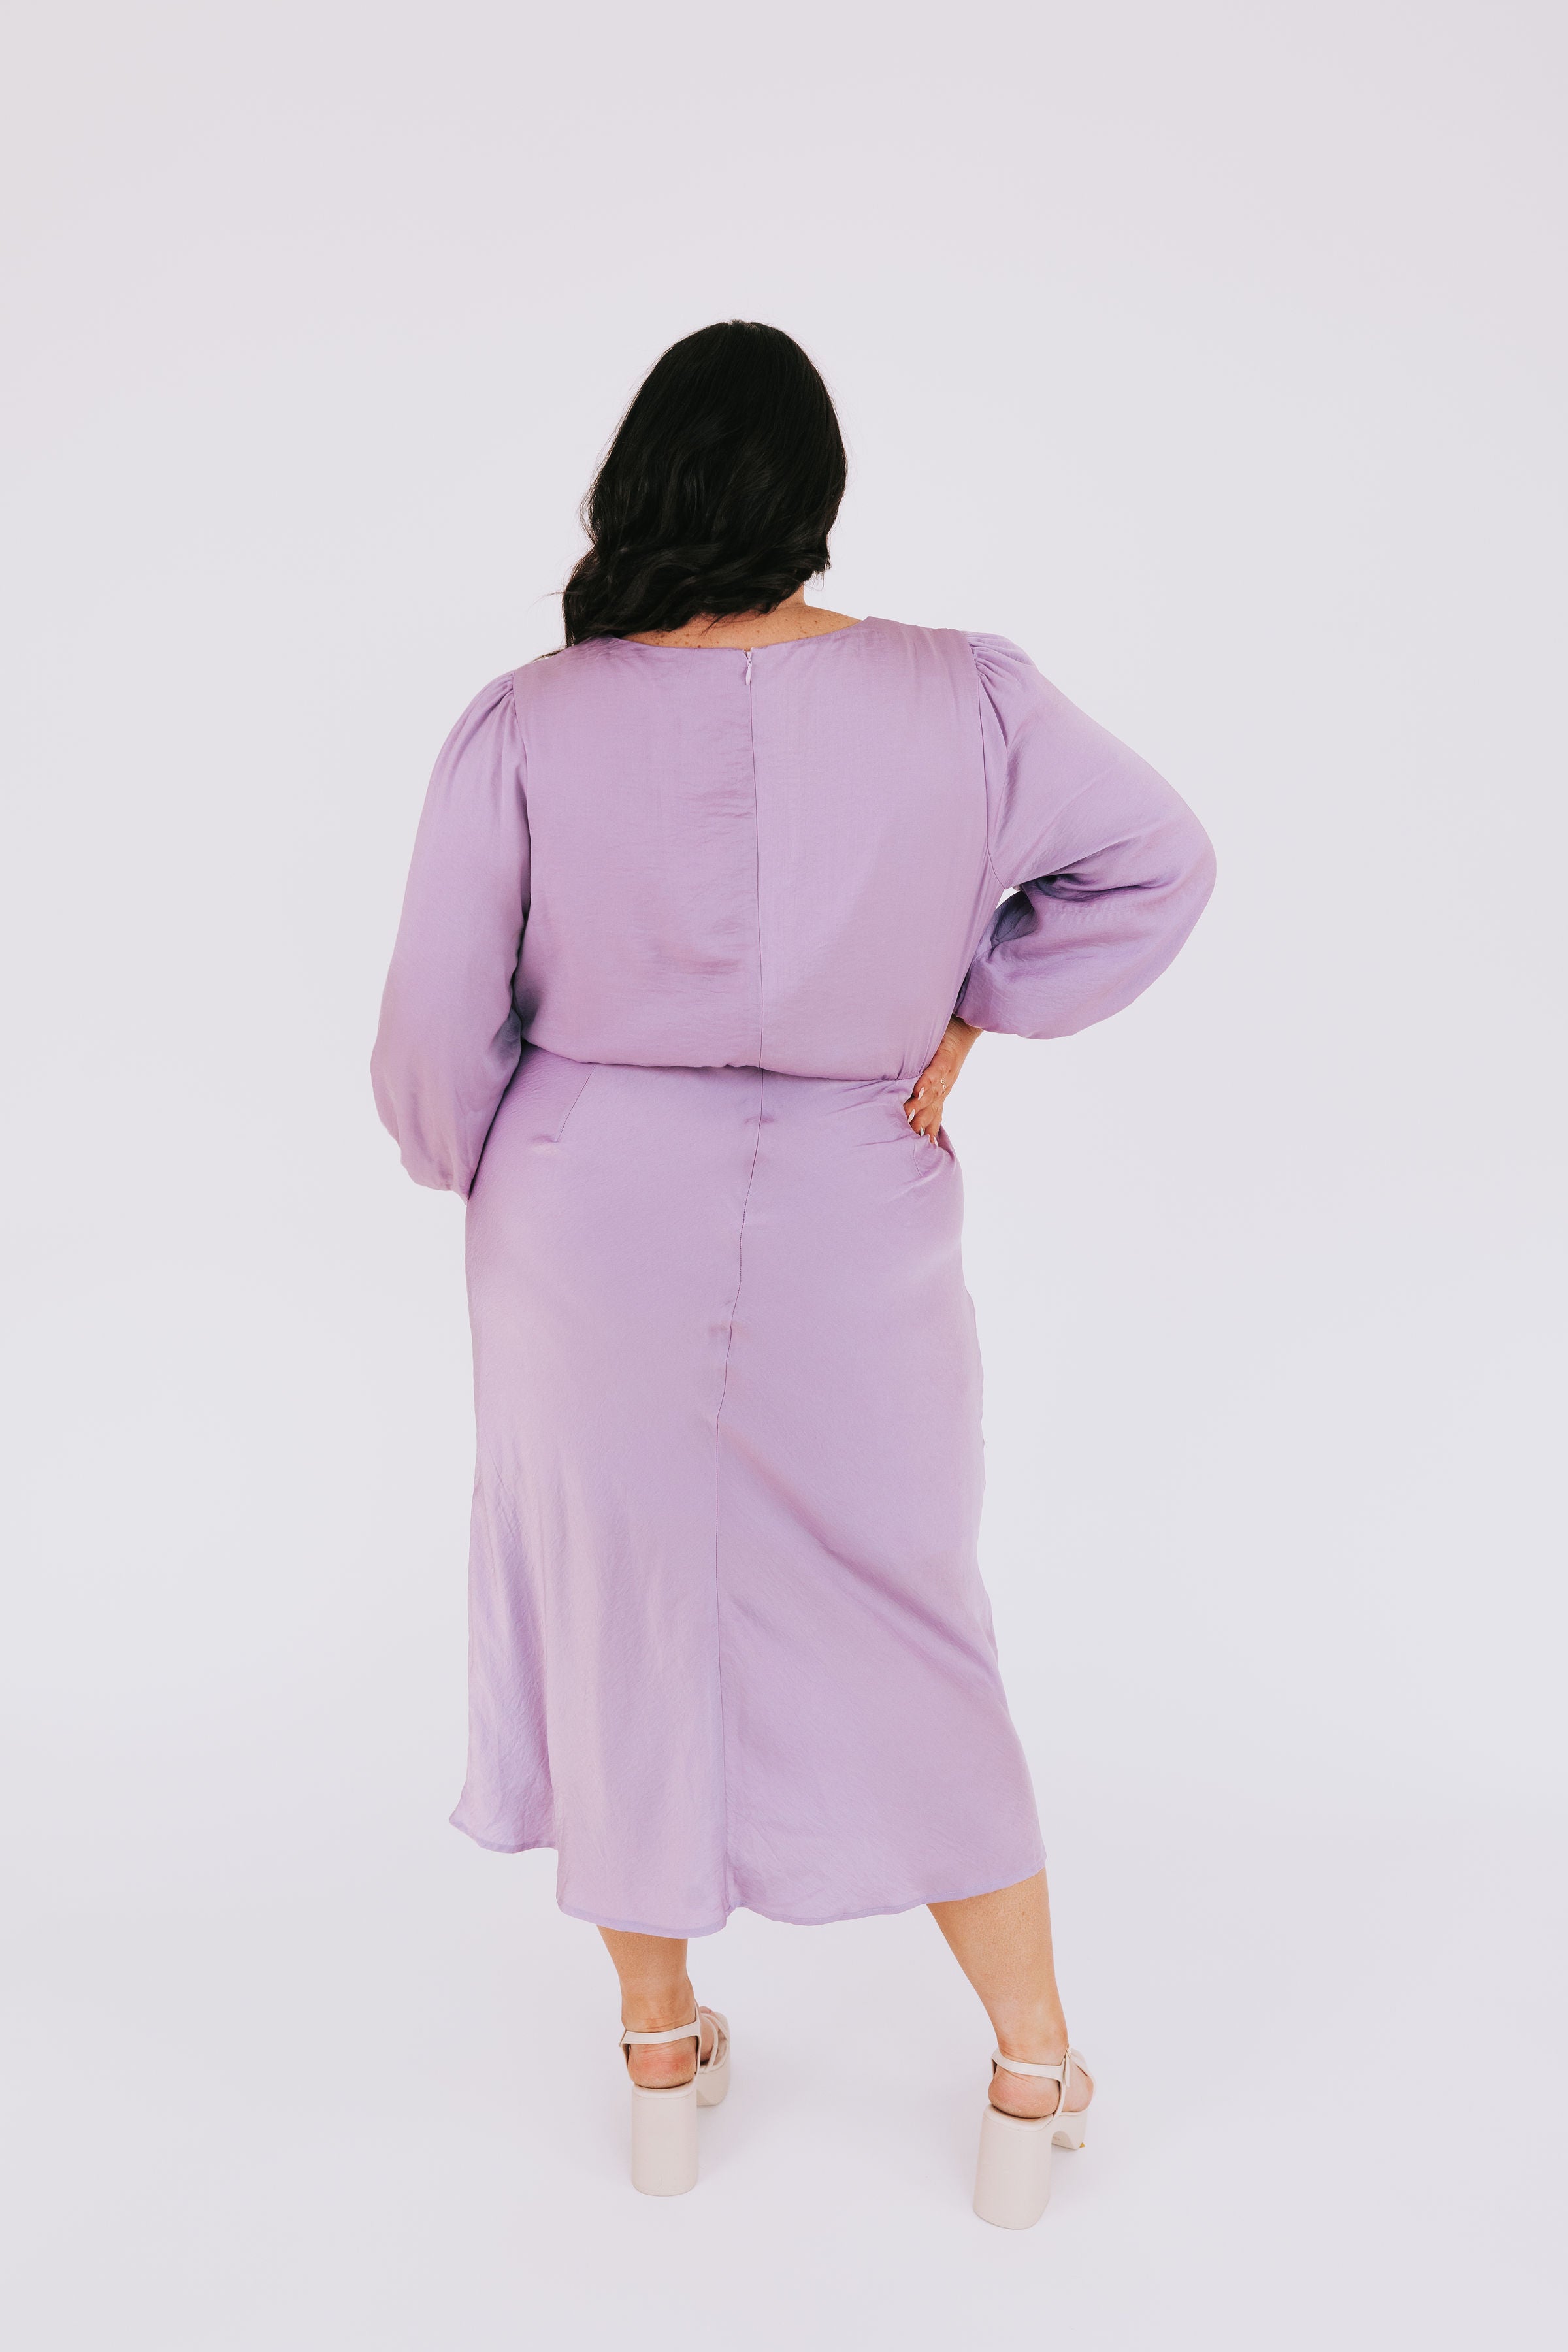 PLUS SIZE - Time Comes Around Dress